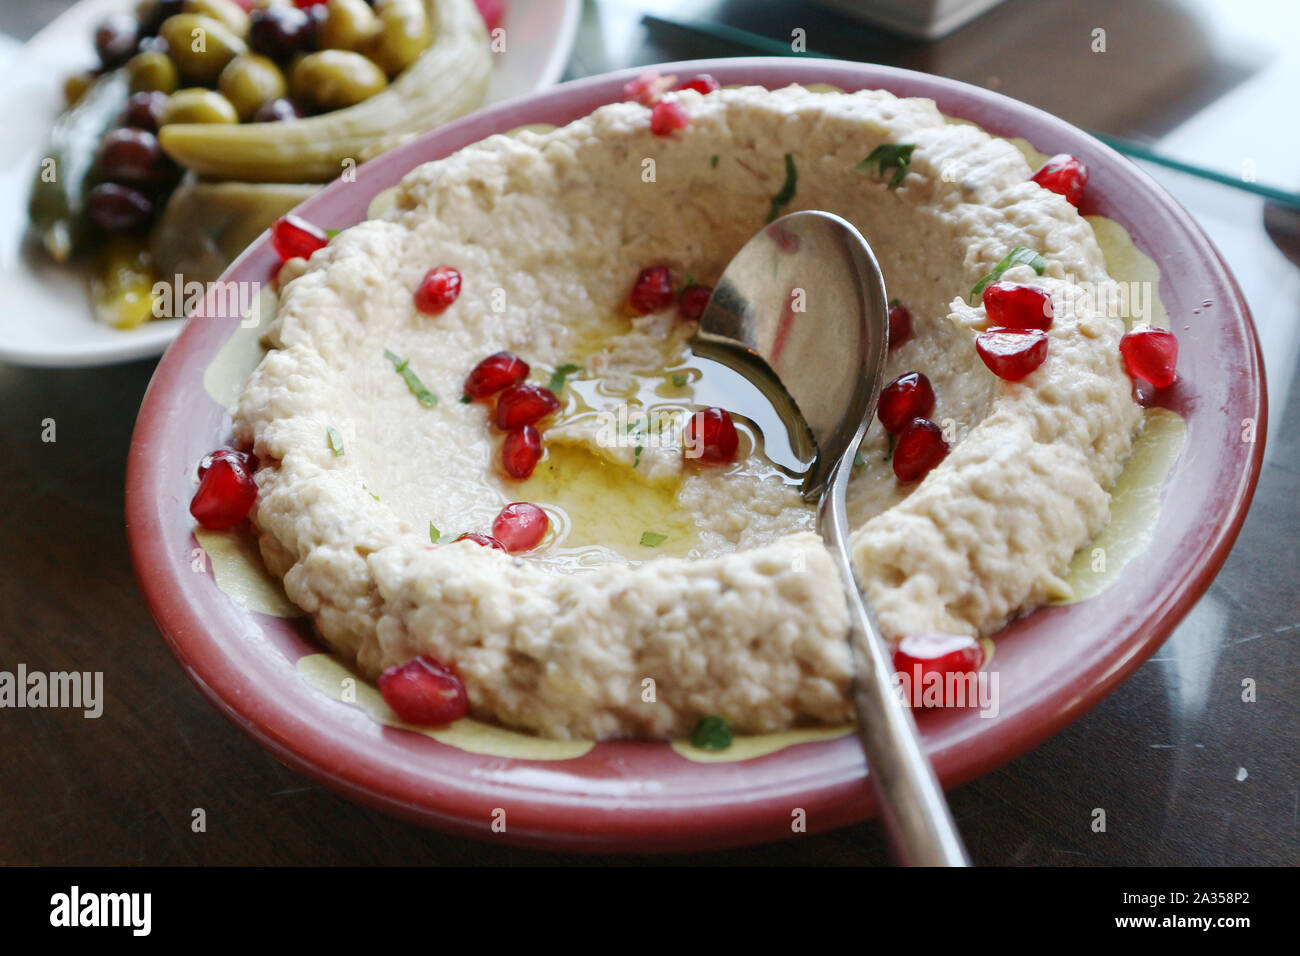 Typical Middle Eastern ground eggplant dip known as mutabbal or baba ghanouj with pomegranate seeds Stock Photo